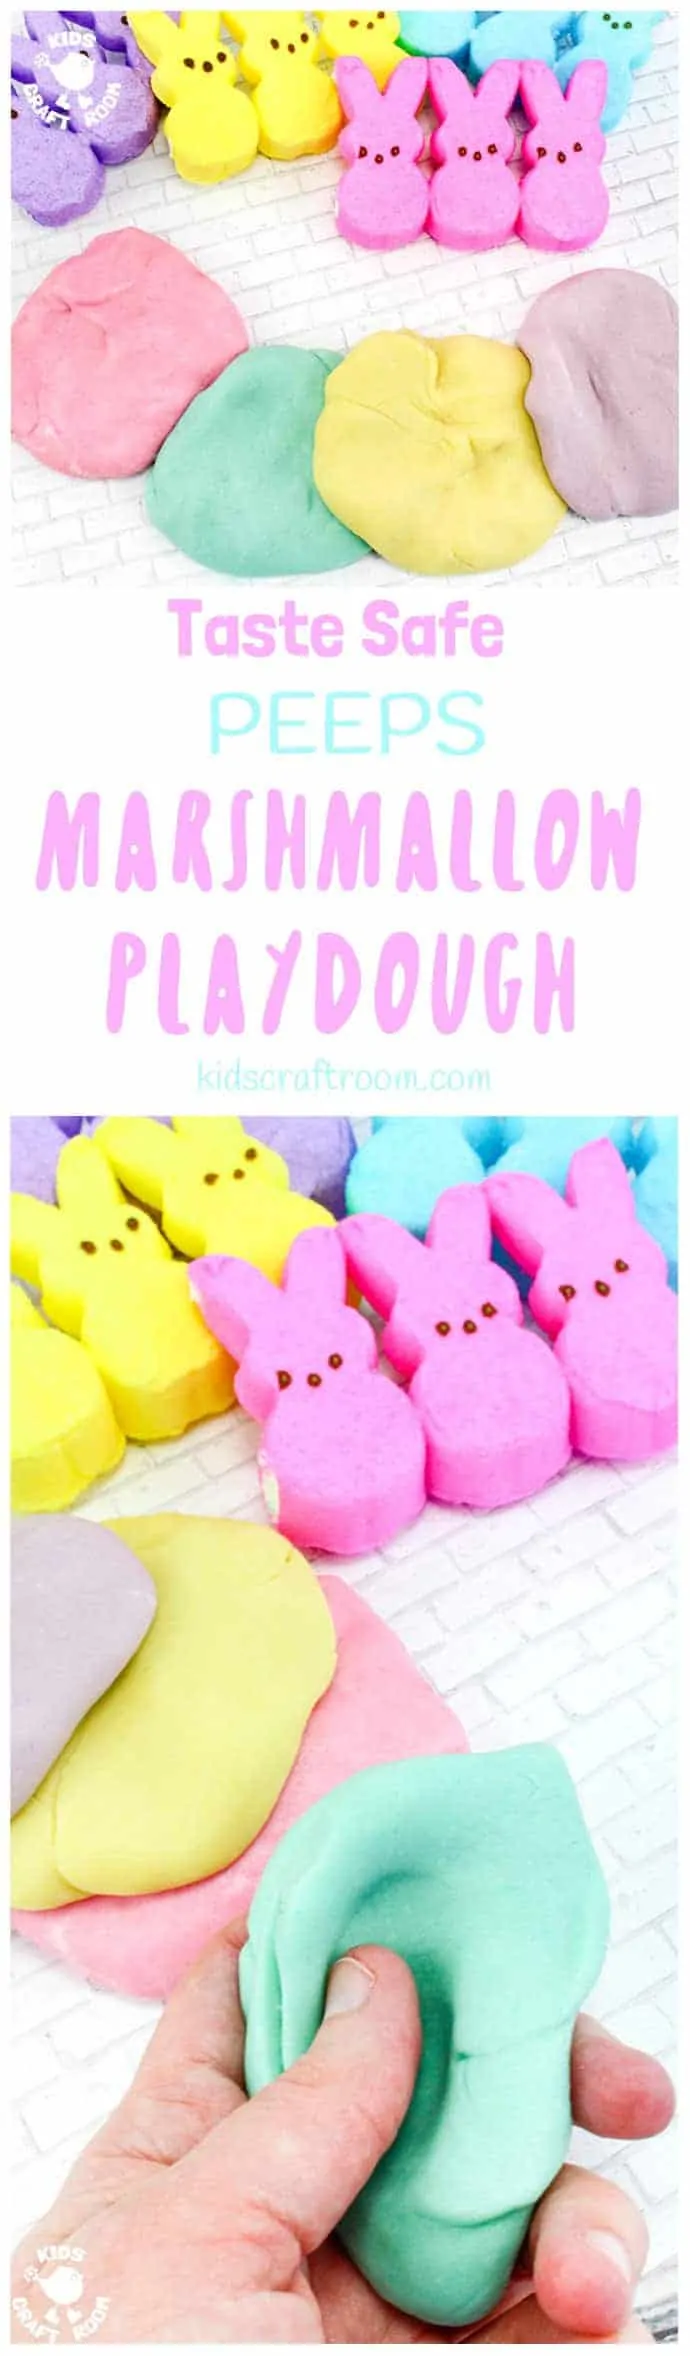 Play Doh Easter Bunny - Easy Clay Modelling Craft for Kids 